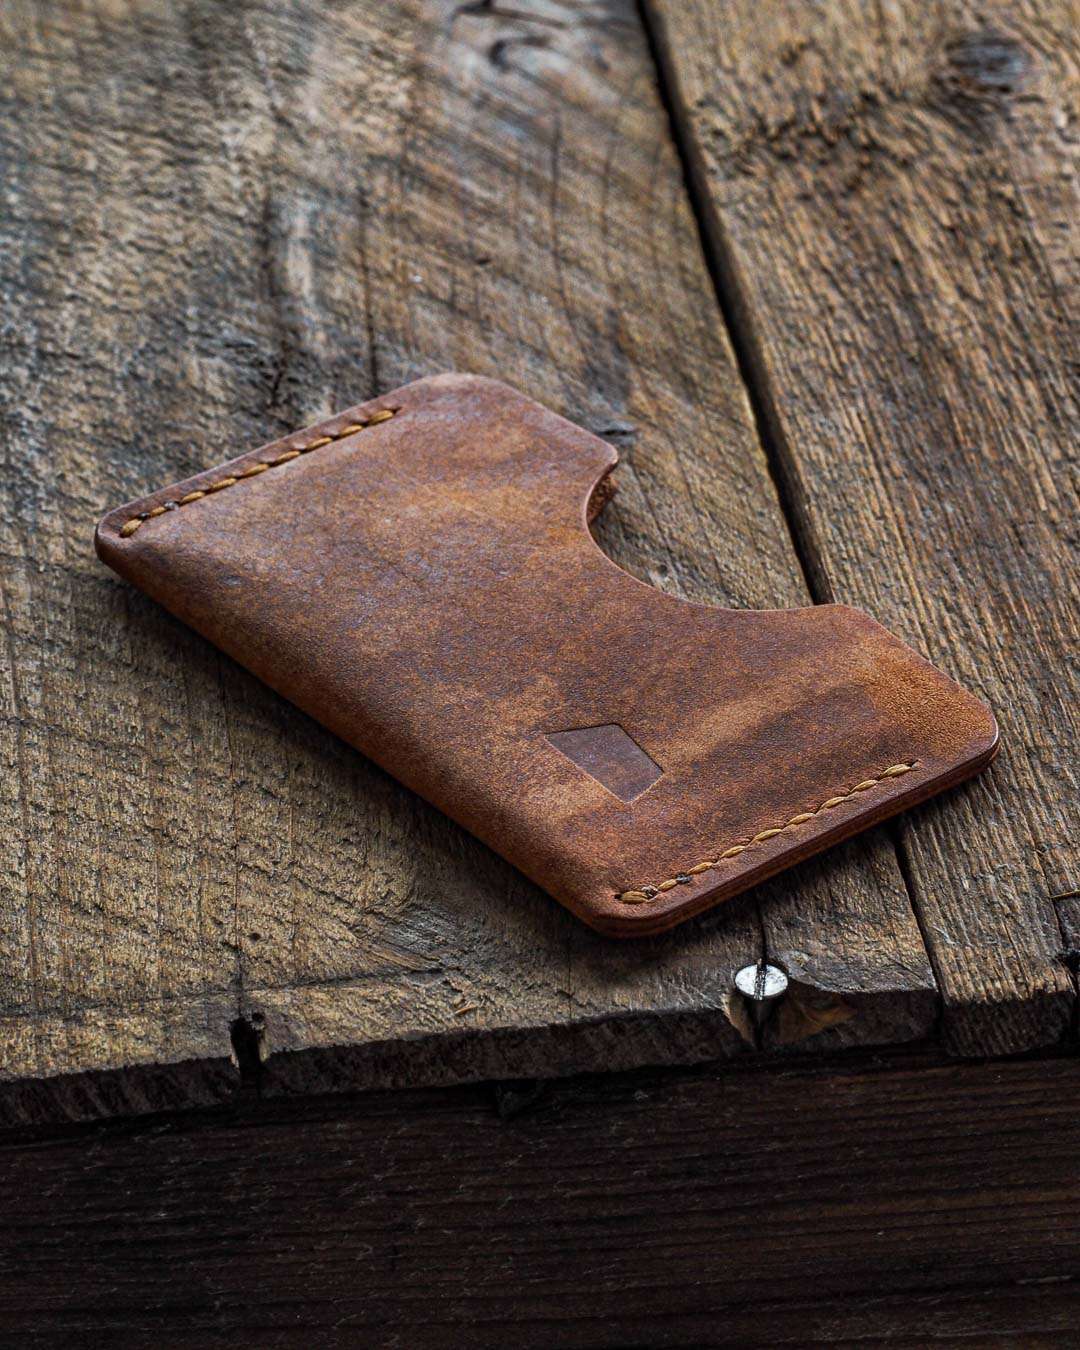 Luava handmade leather wallet handcrafted leatherwallet cardholder card holder cardwallet vegetable tanned absolute back angle